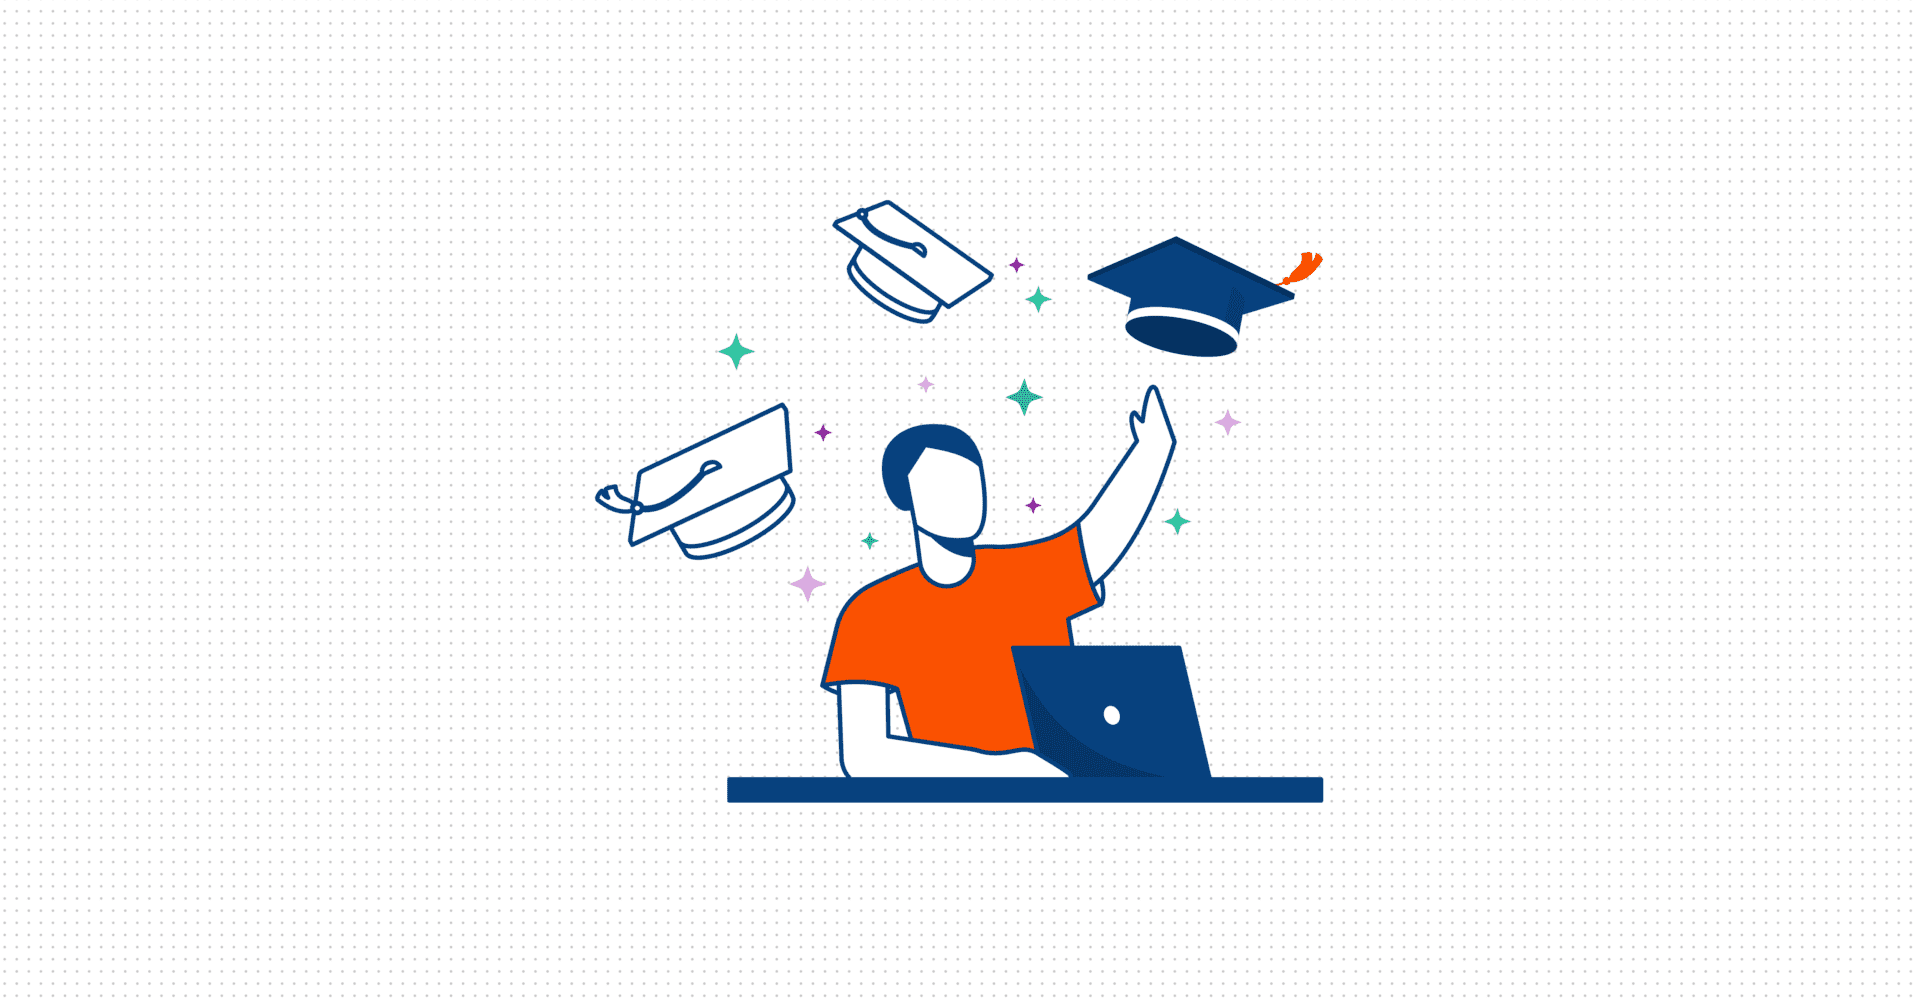 A vector graphic of a person with a laptop choosing between three graduation caps